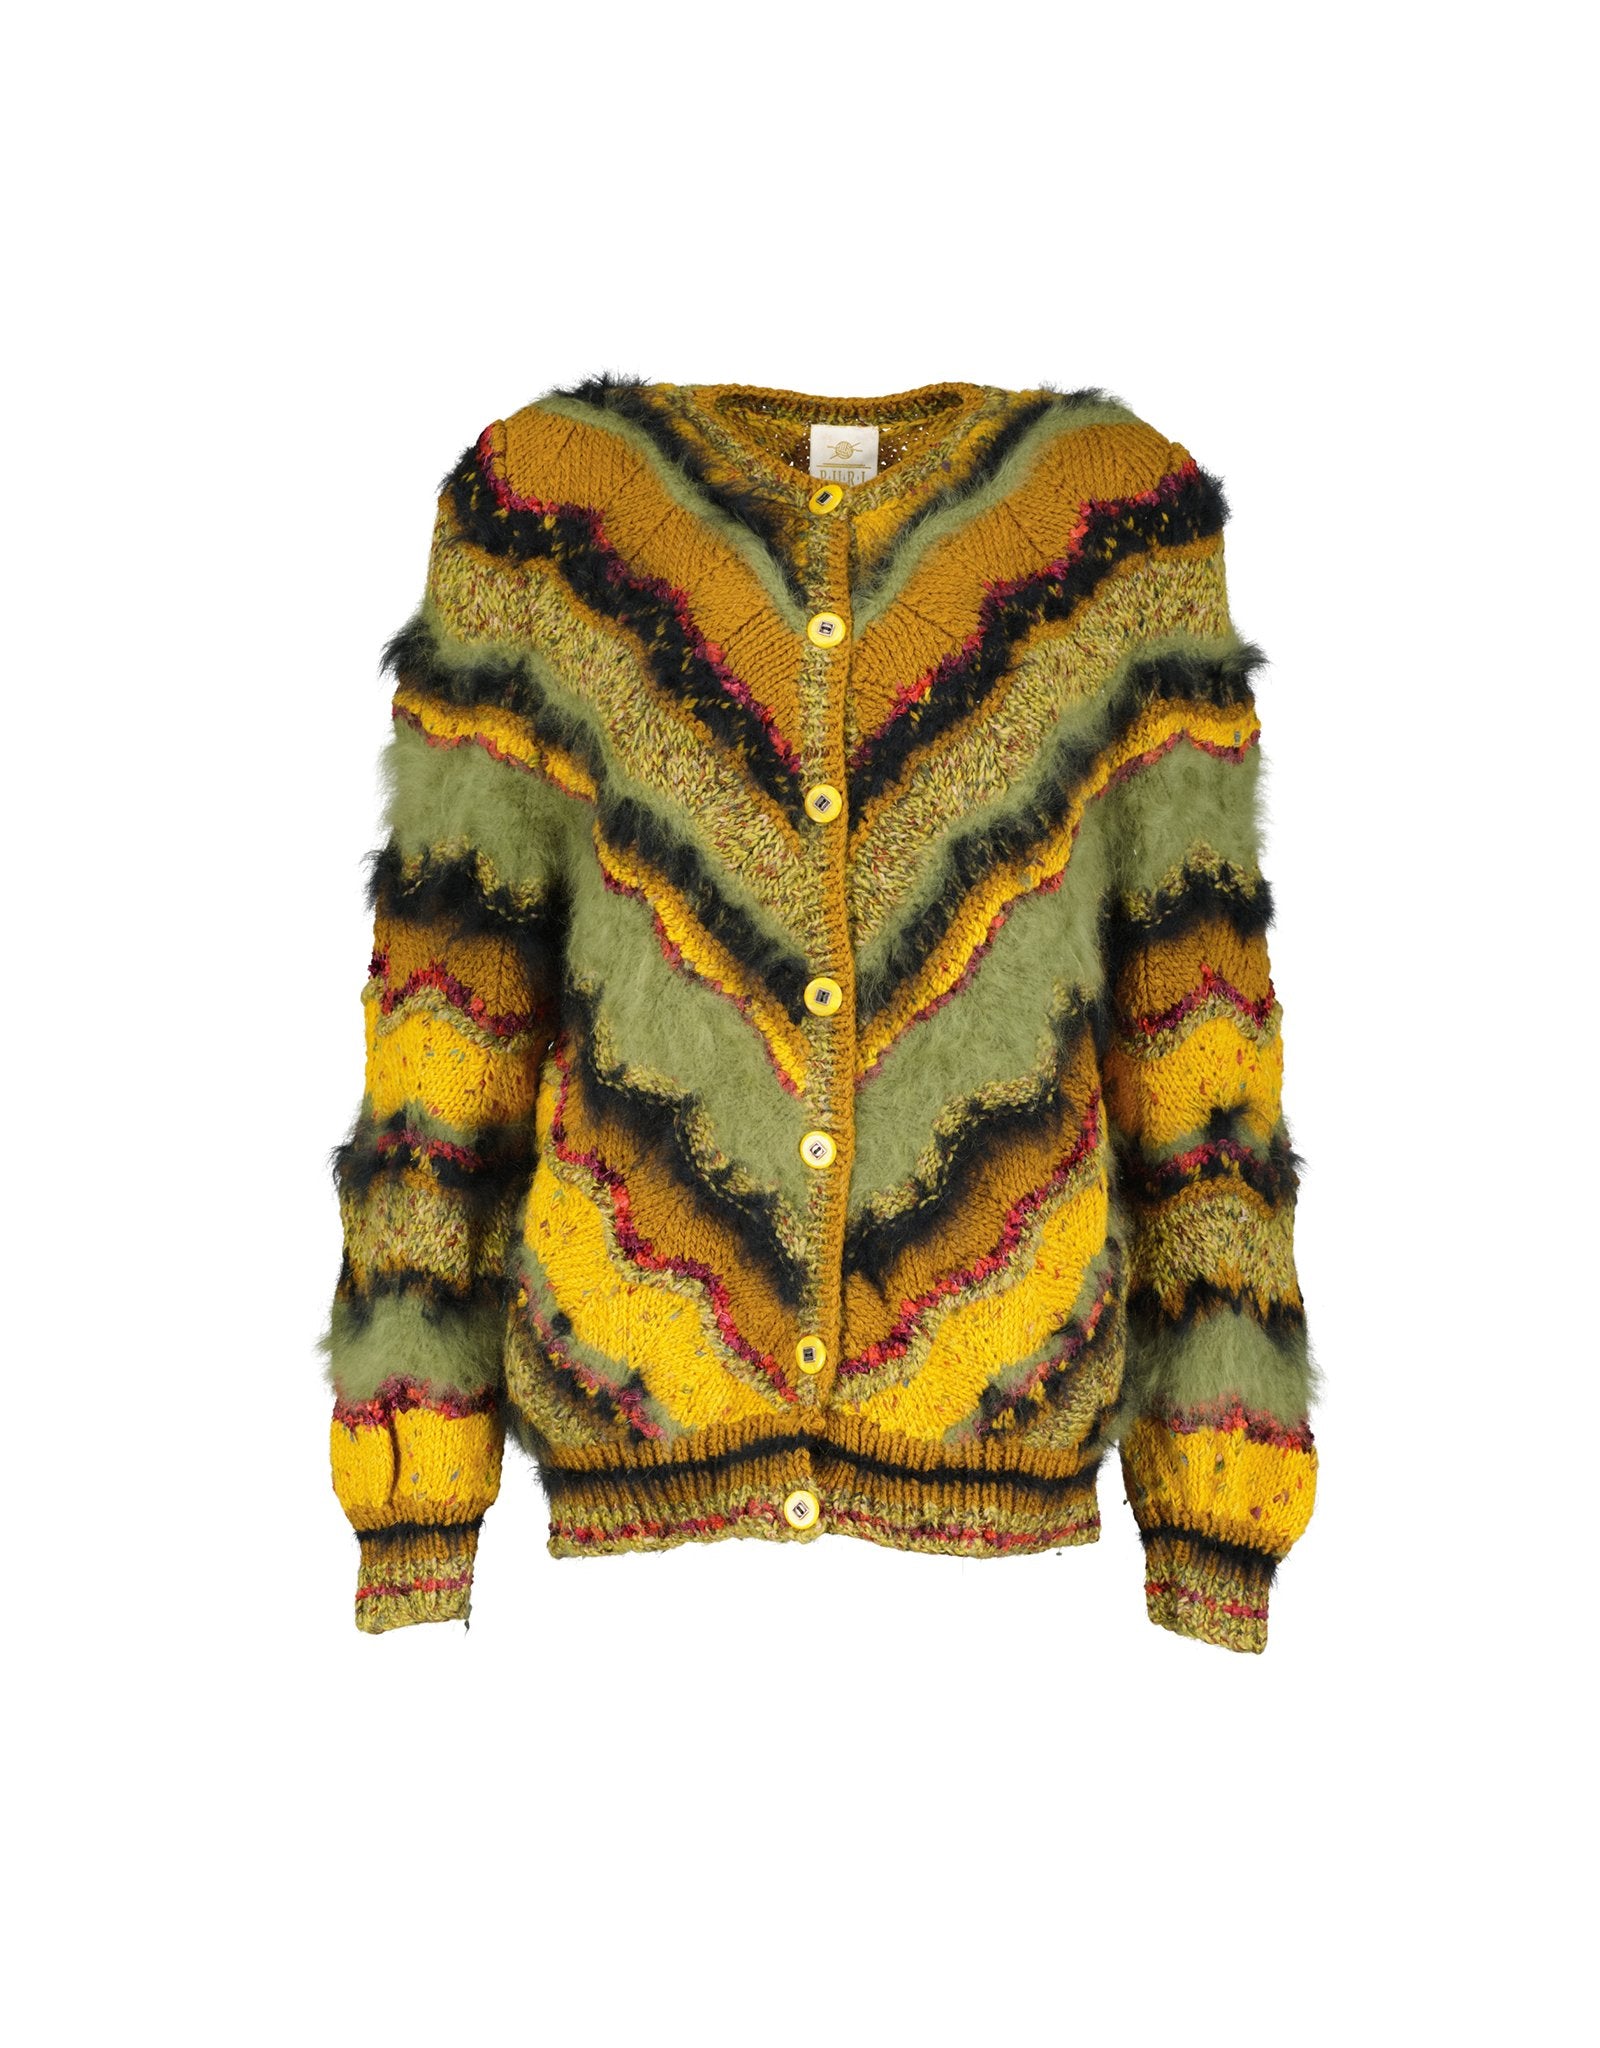 Striking Colors Cardigan in Wool Angora Mohair Blend, One Size